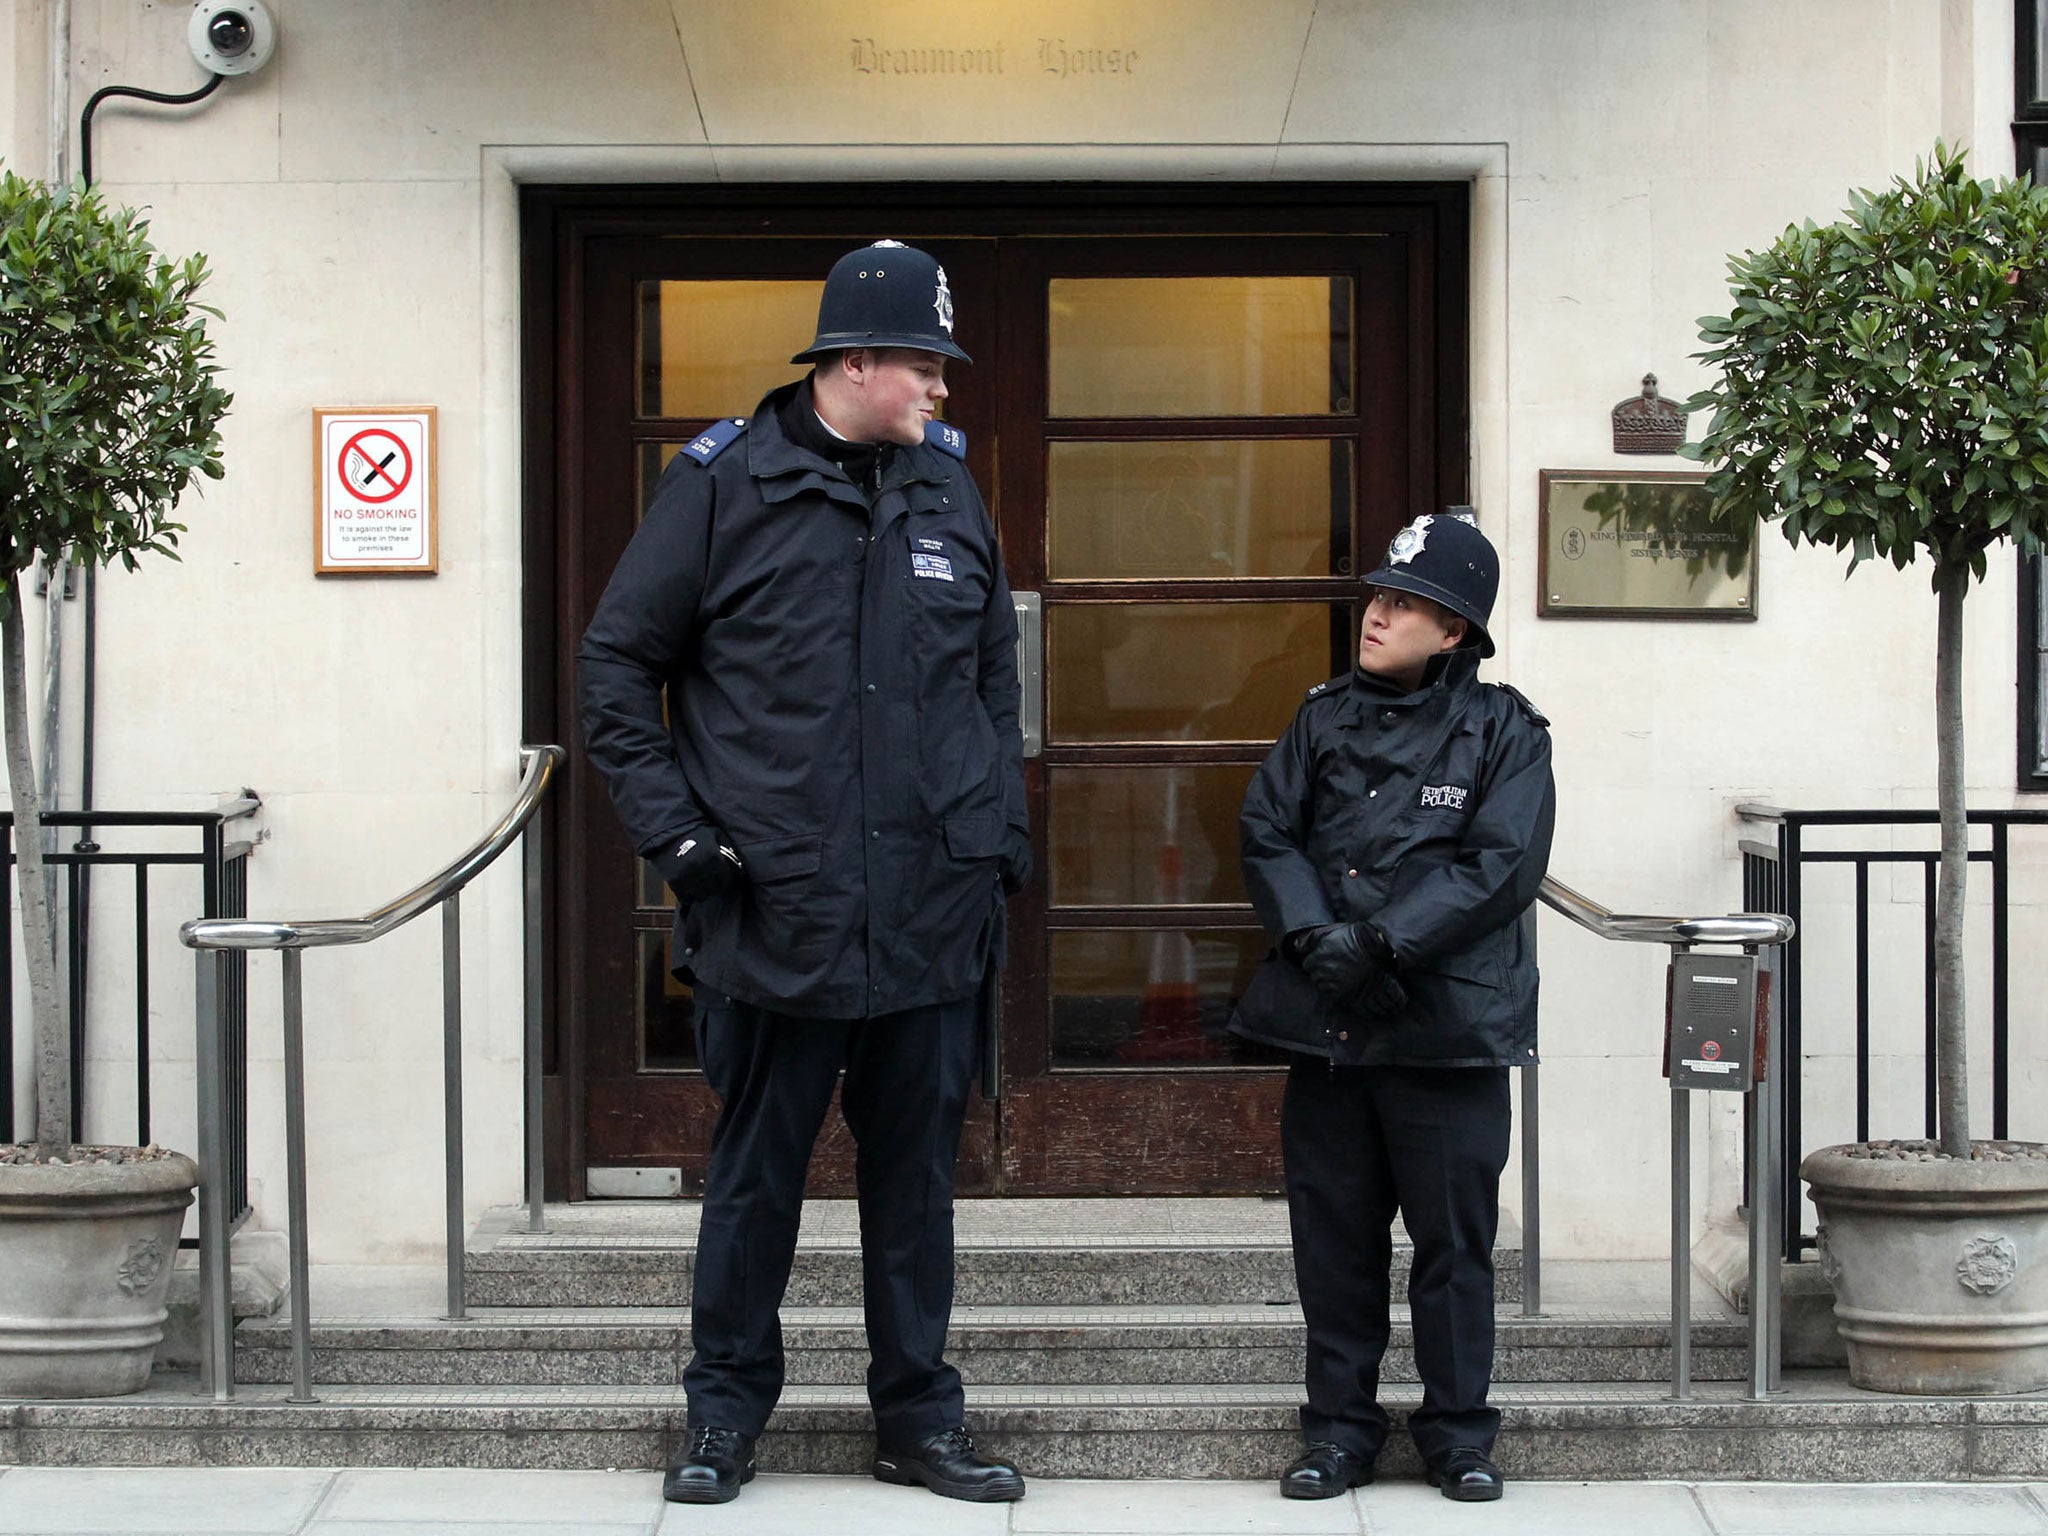 Pc Anthony Wallyn (left), who stands at 7ft 2ins tall, towering over his colleague, Pc Tony Thich, who is 5ft 6ins and the smallest officer in the Met's Westminster Borough Support Unit